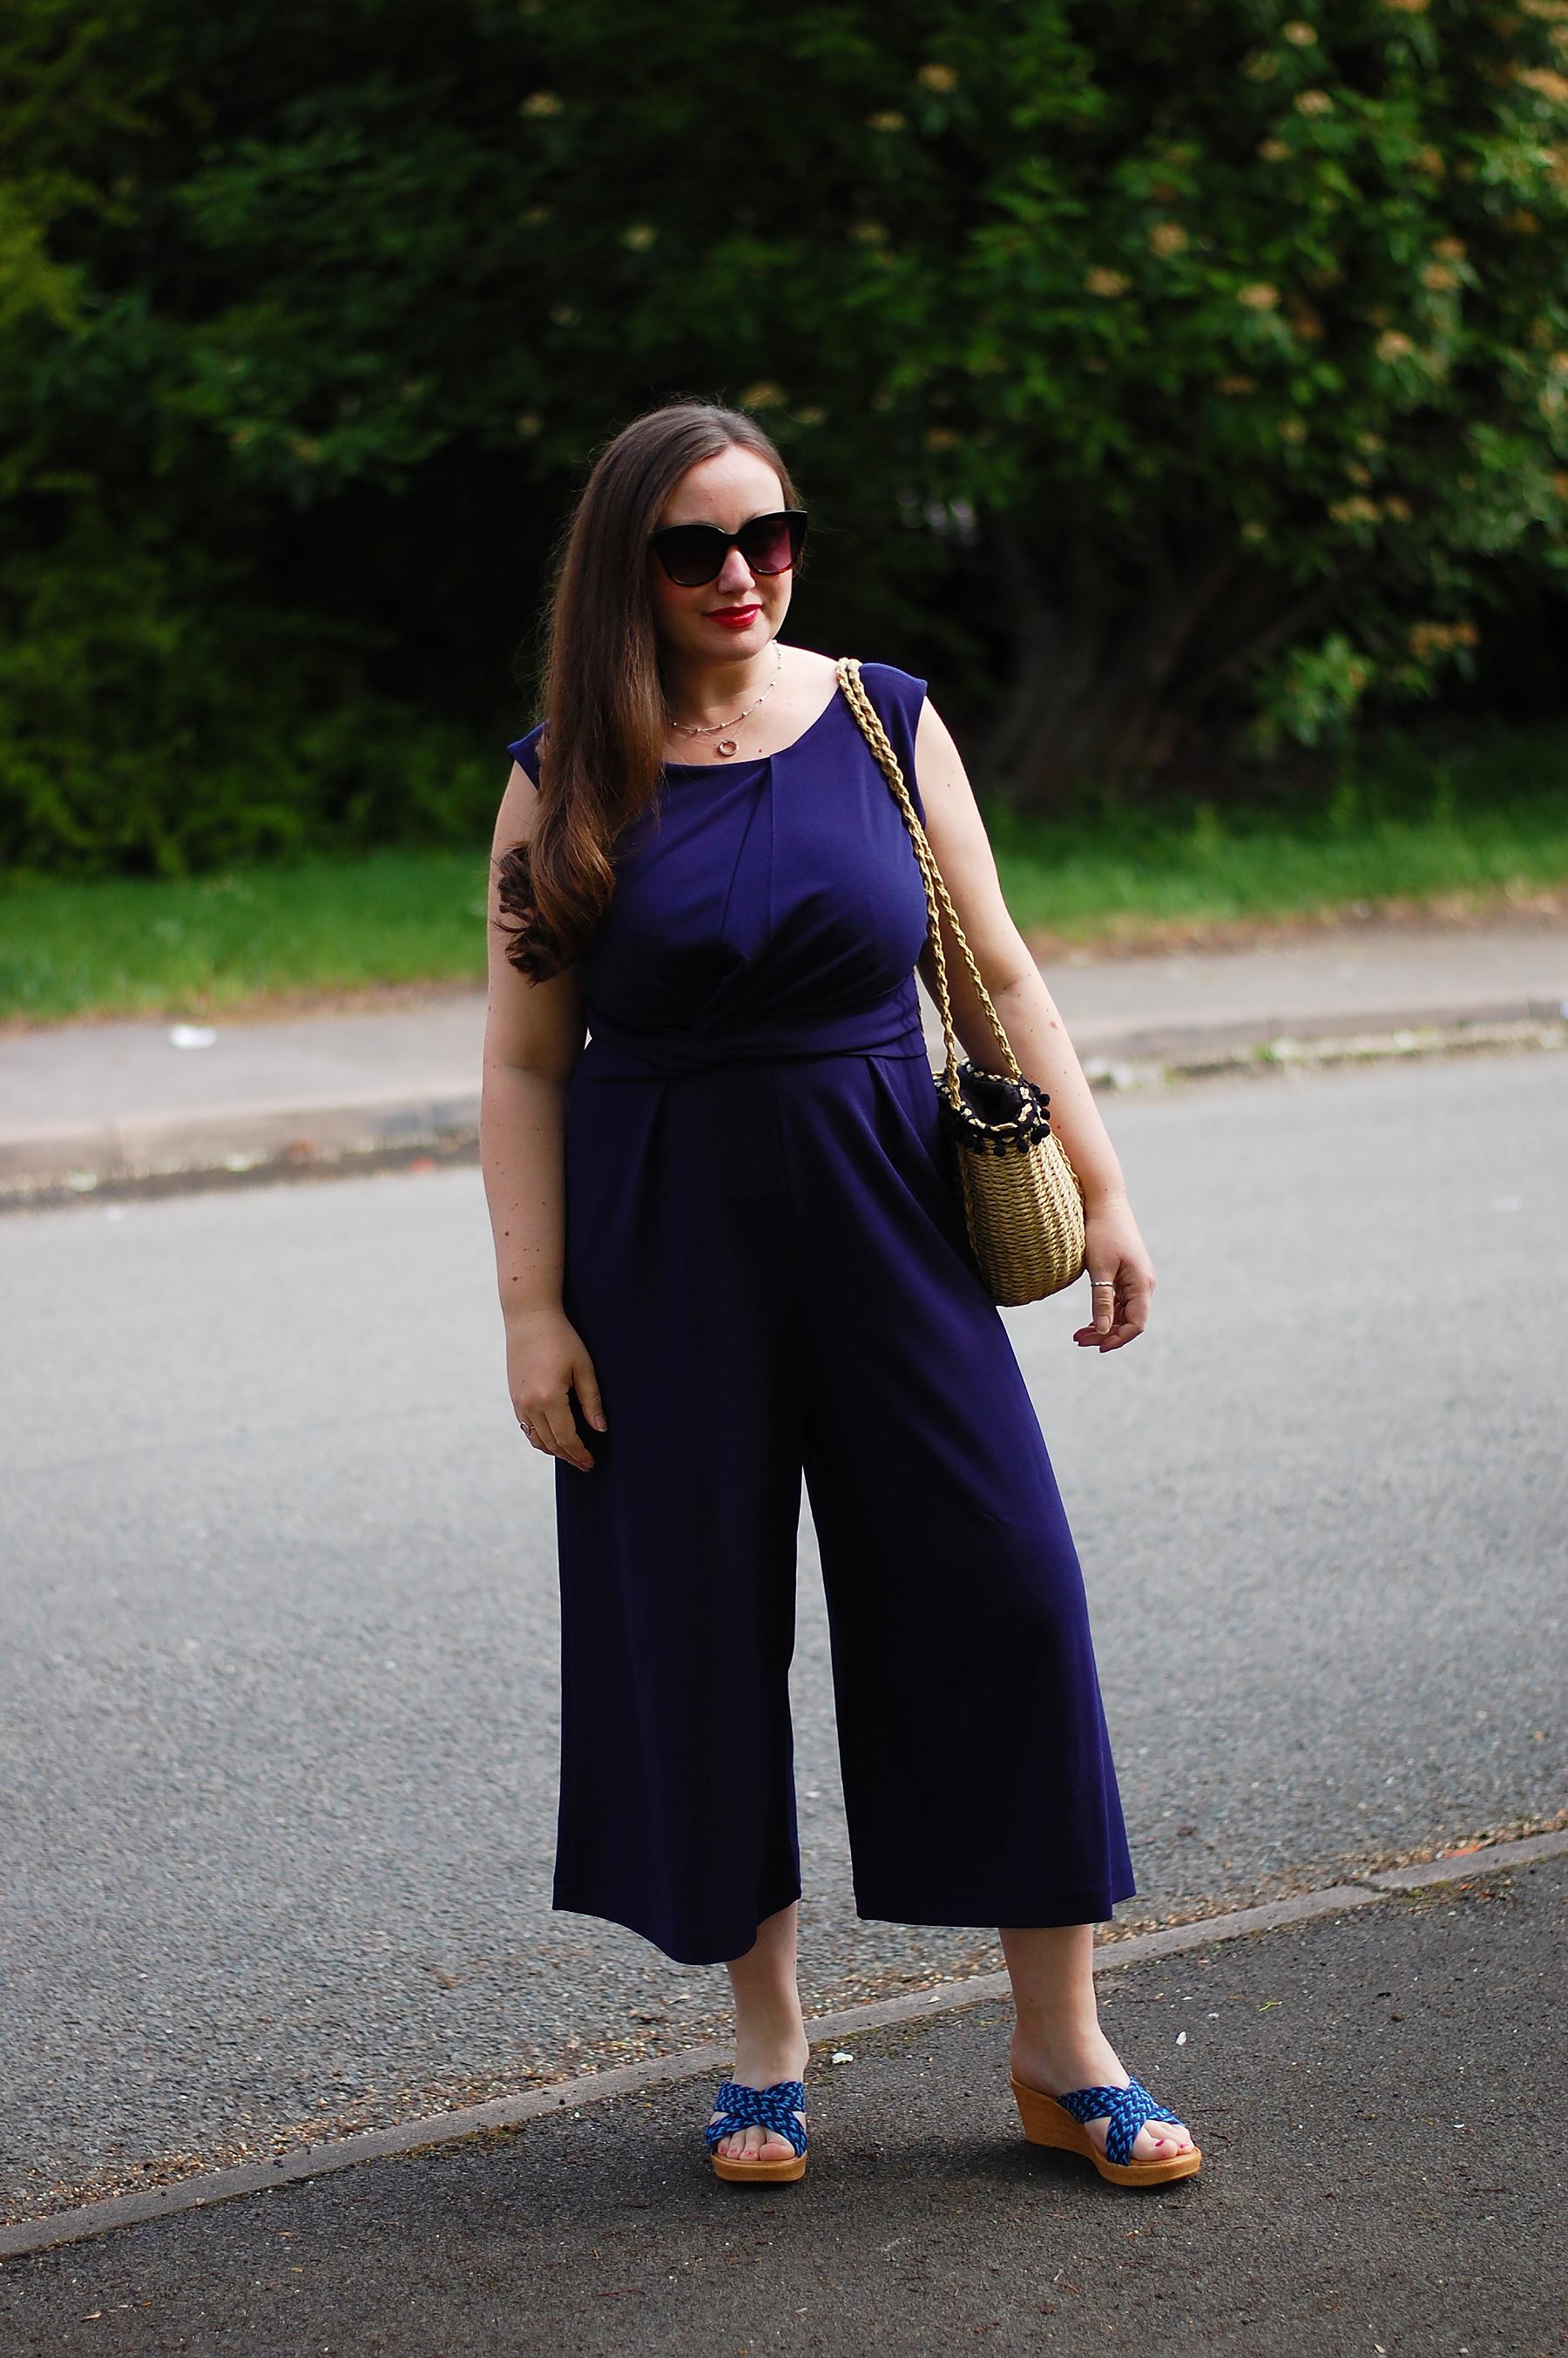 Jumpsuit, wedges and basket bag outfit